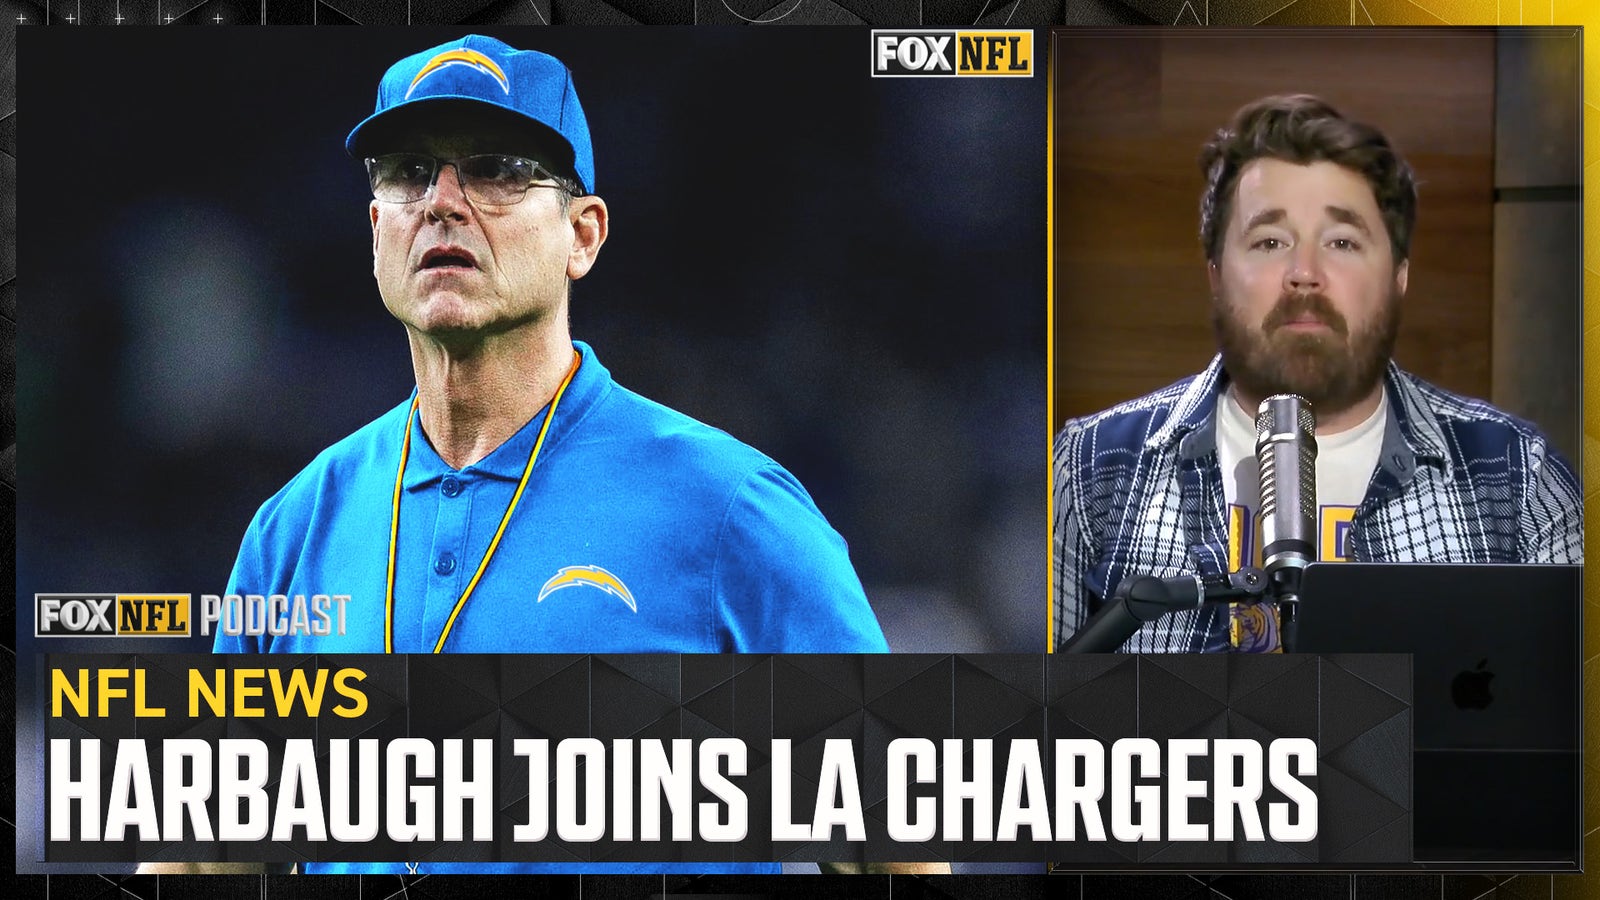 Jim Harbaugh leaves Michigan, accepts Los Angeles Chargers HC gig